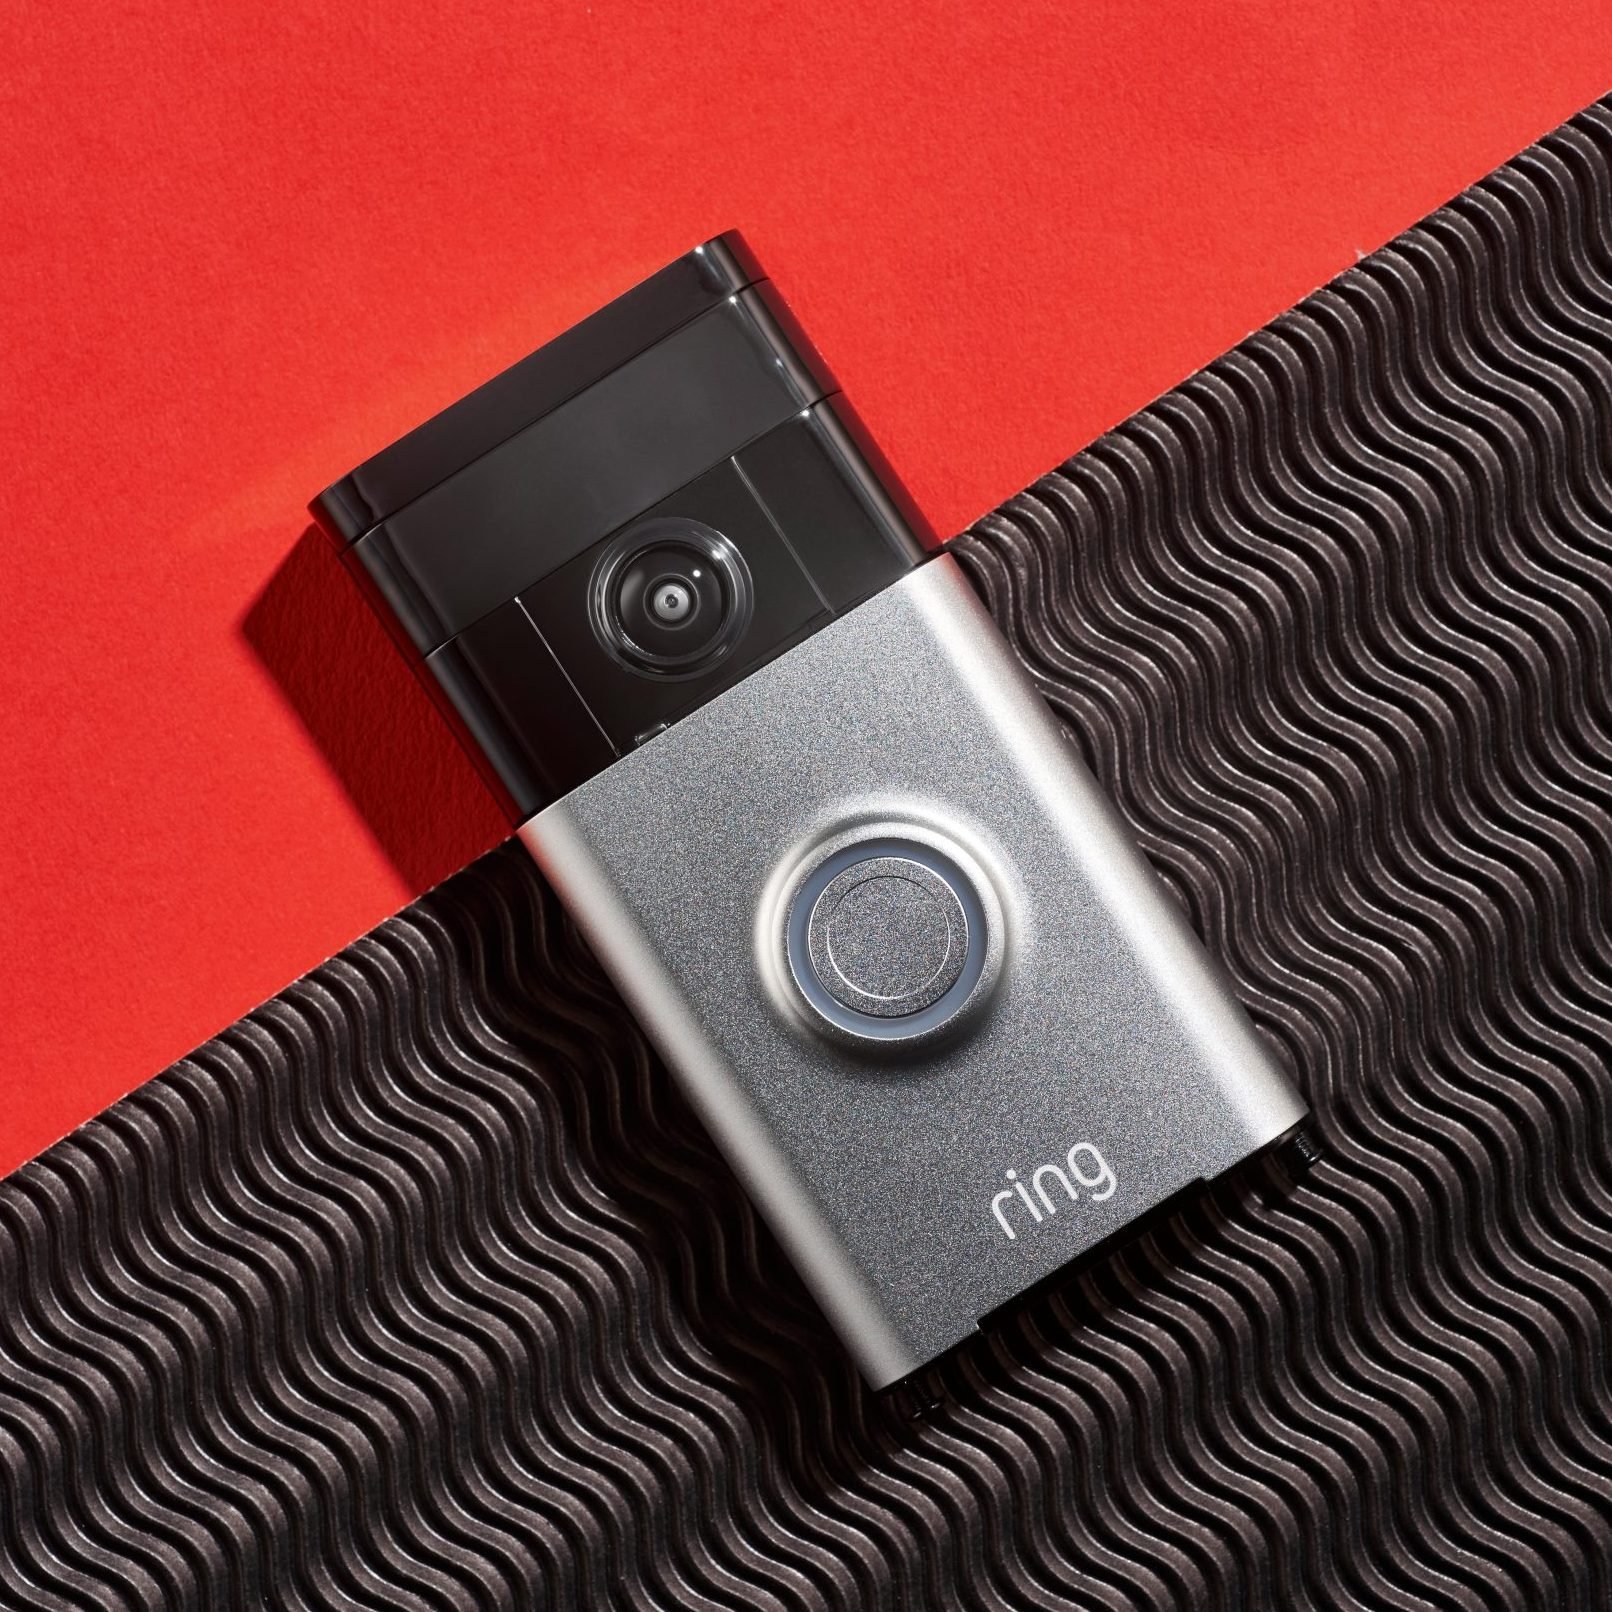 ring doorbell on a red background